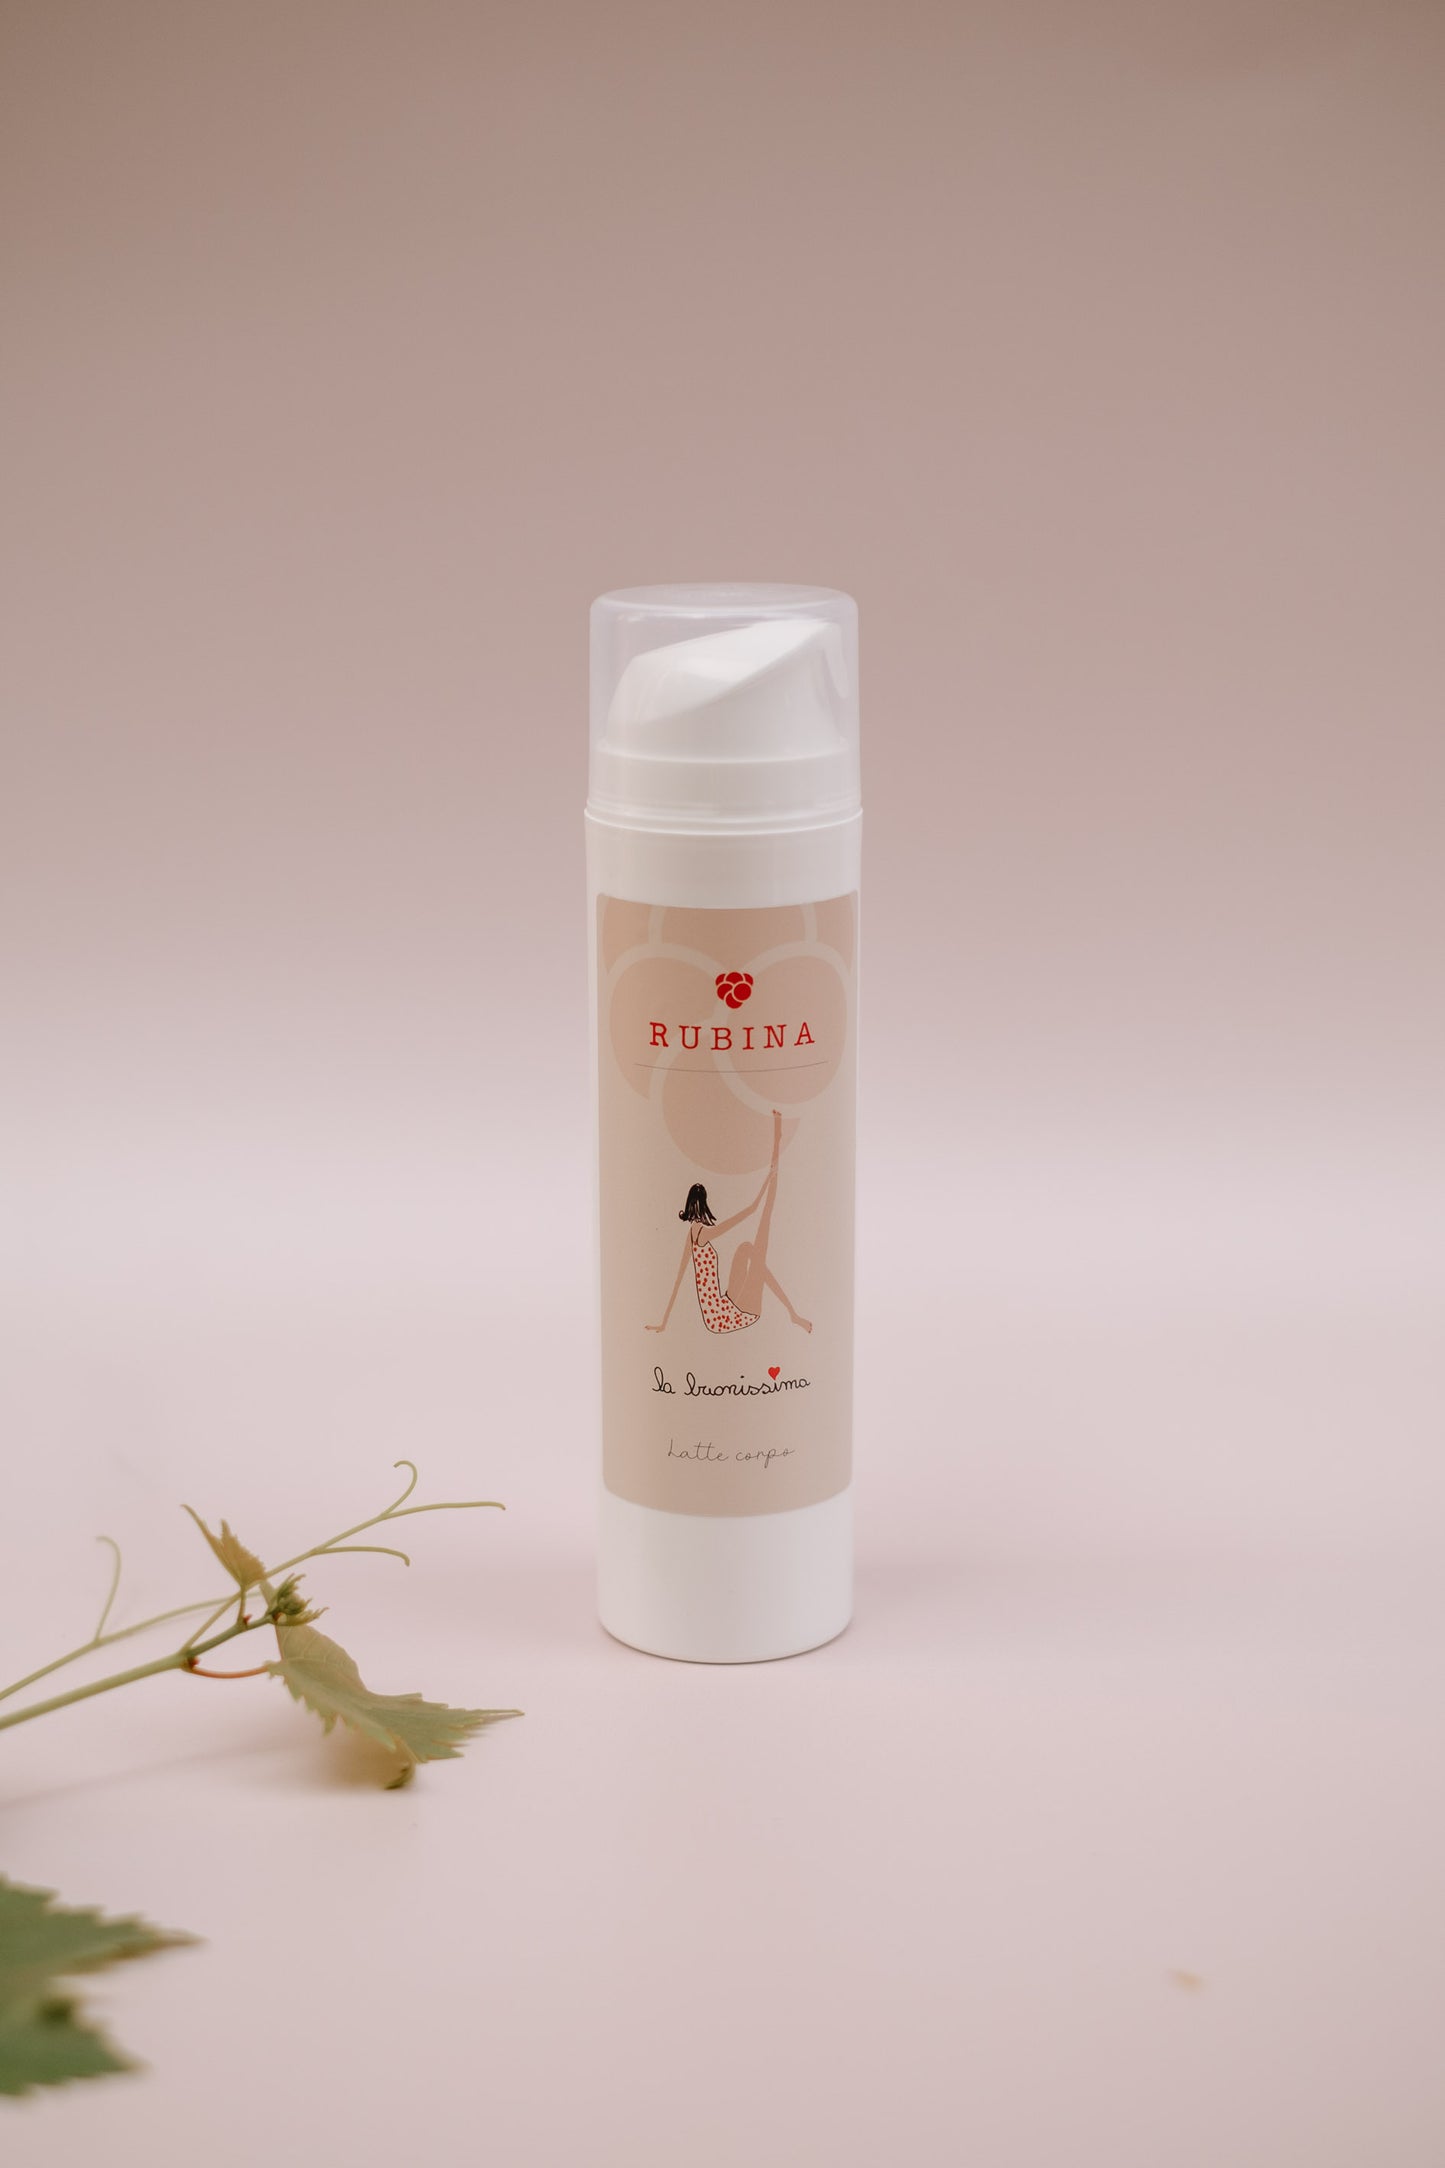 Body Milk "THE GOODNESS" with Organic Water and Grape Extracts